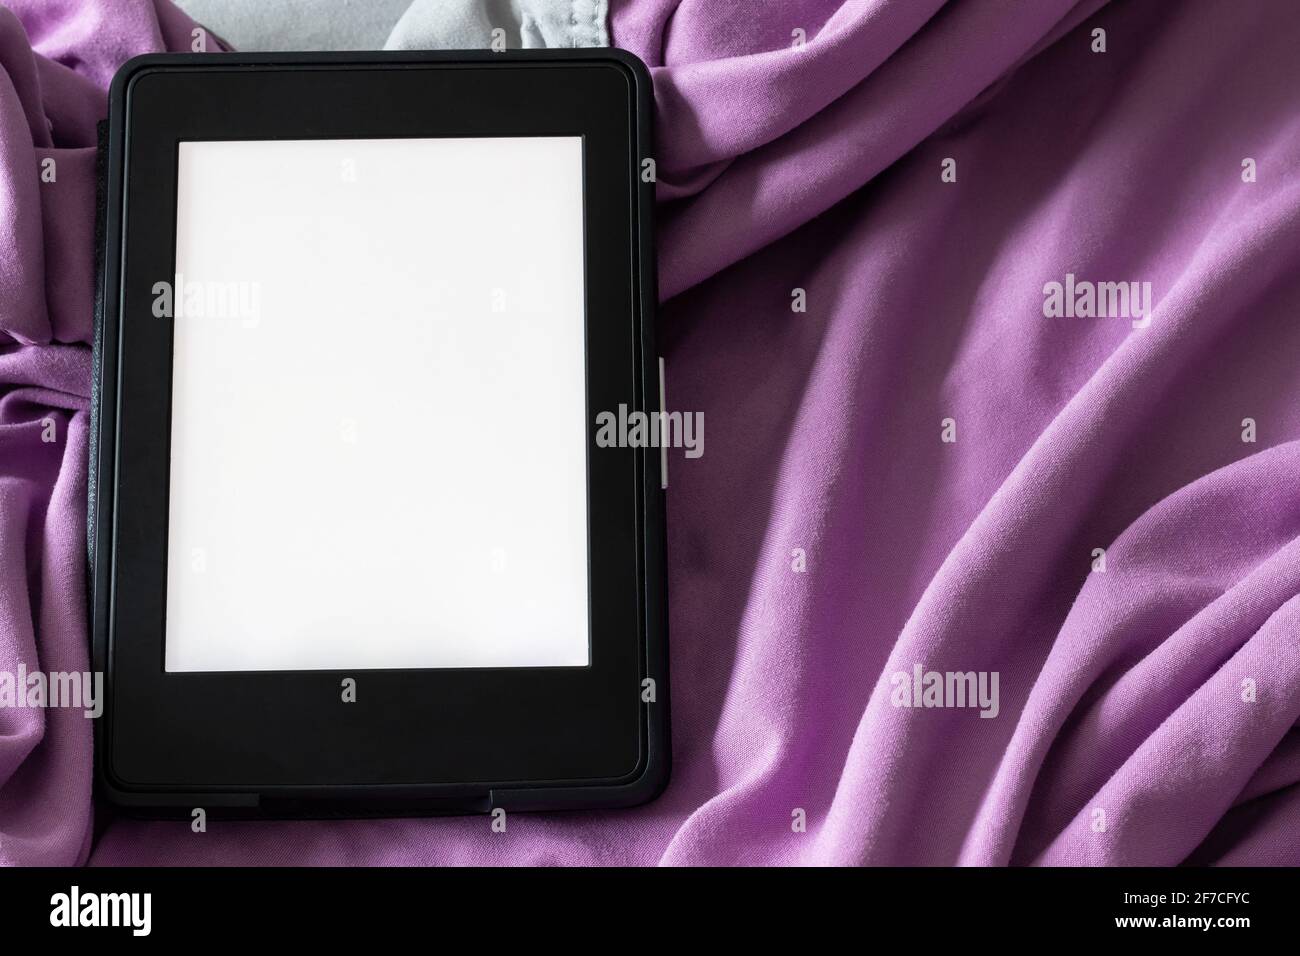 A modern black e-reader electronic book with a blank screen on a gray and purple bed. Mockup template tablet on microfiber bedding closeup Stock Photo